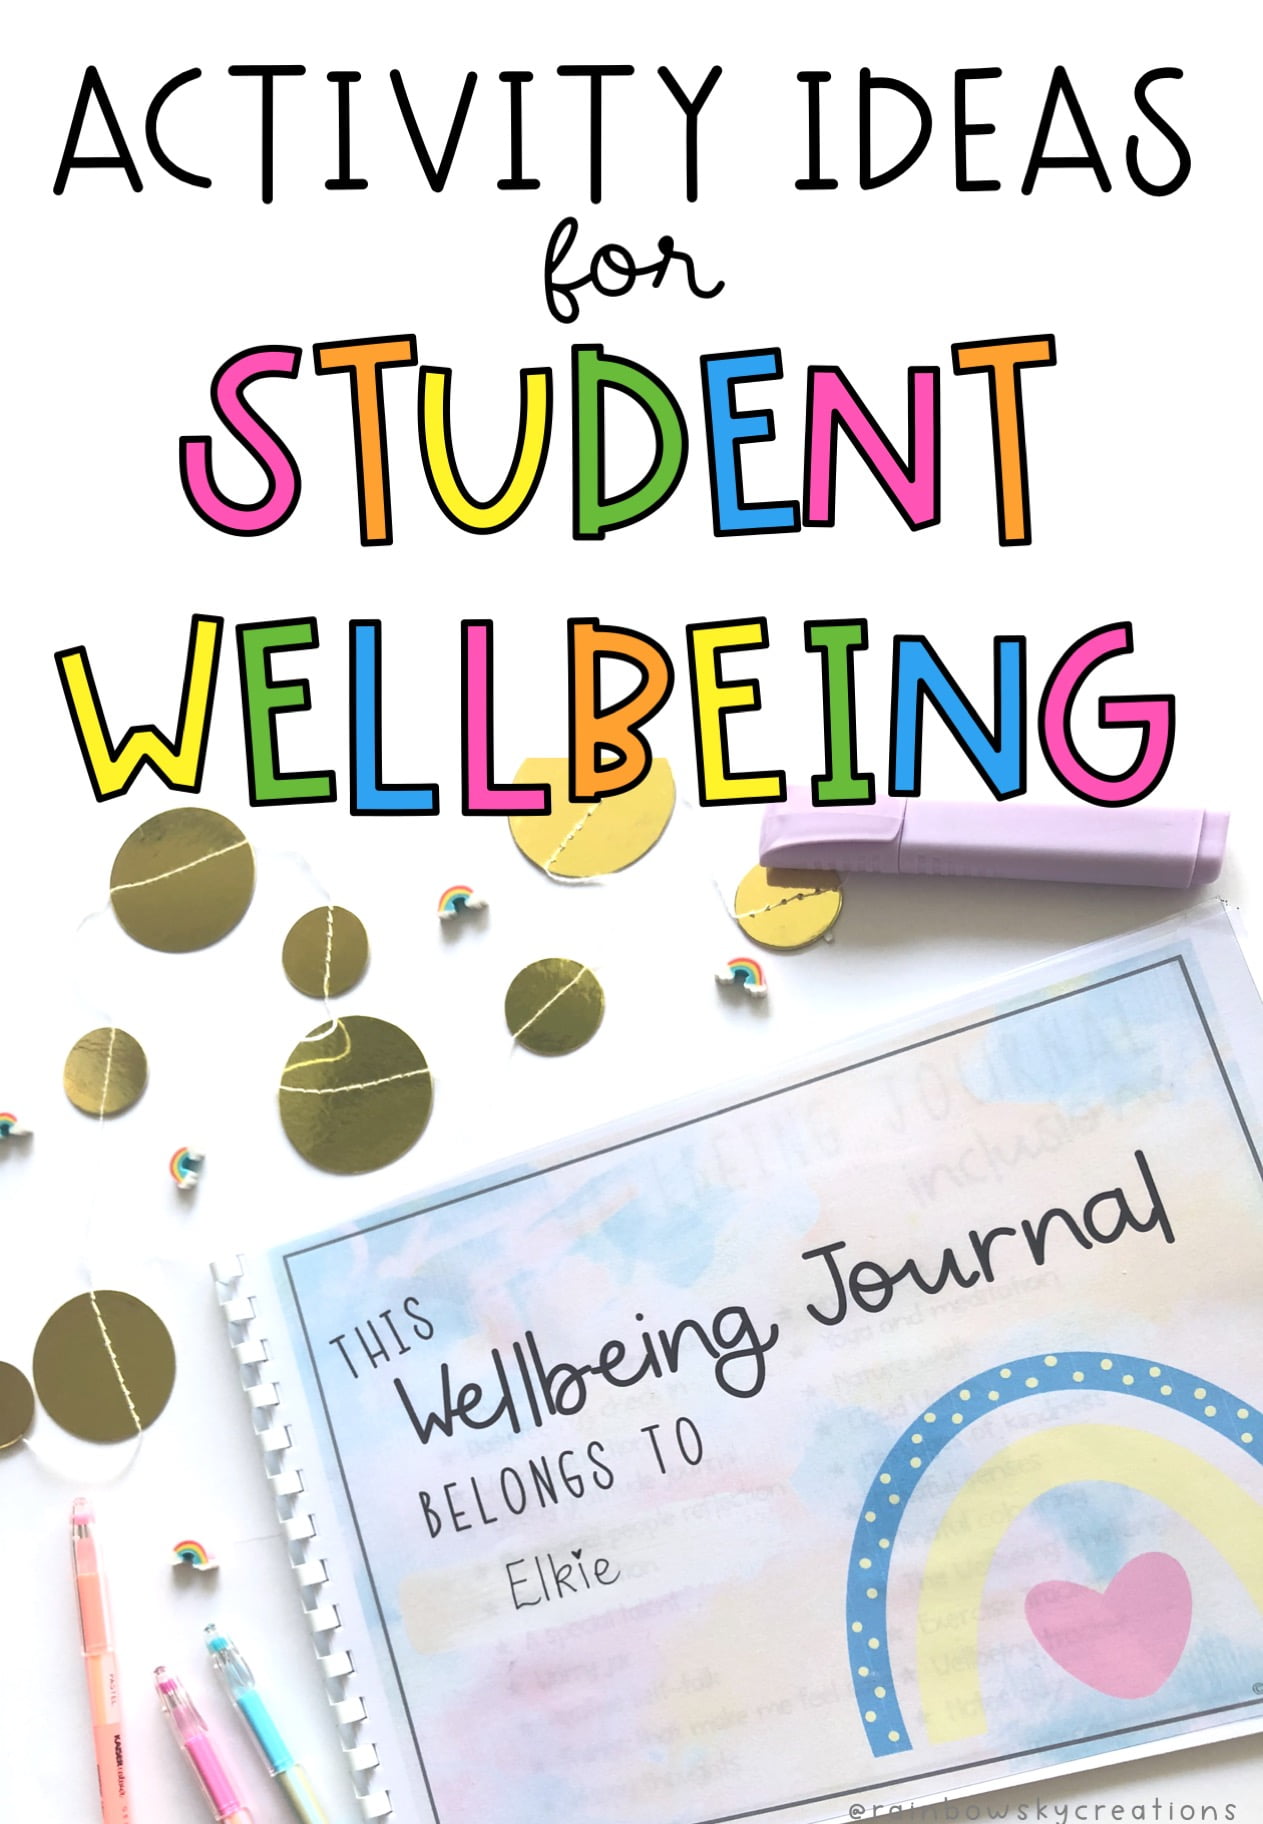 Activities to Support Student Wellbeing - Rainbow Sky Creations